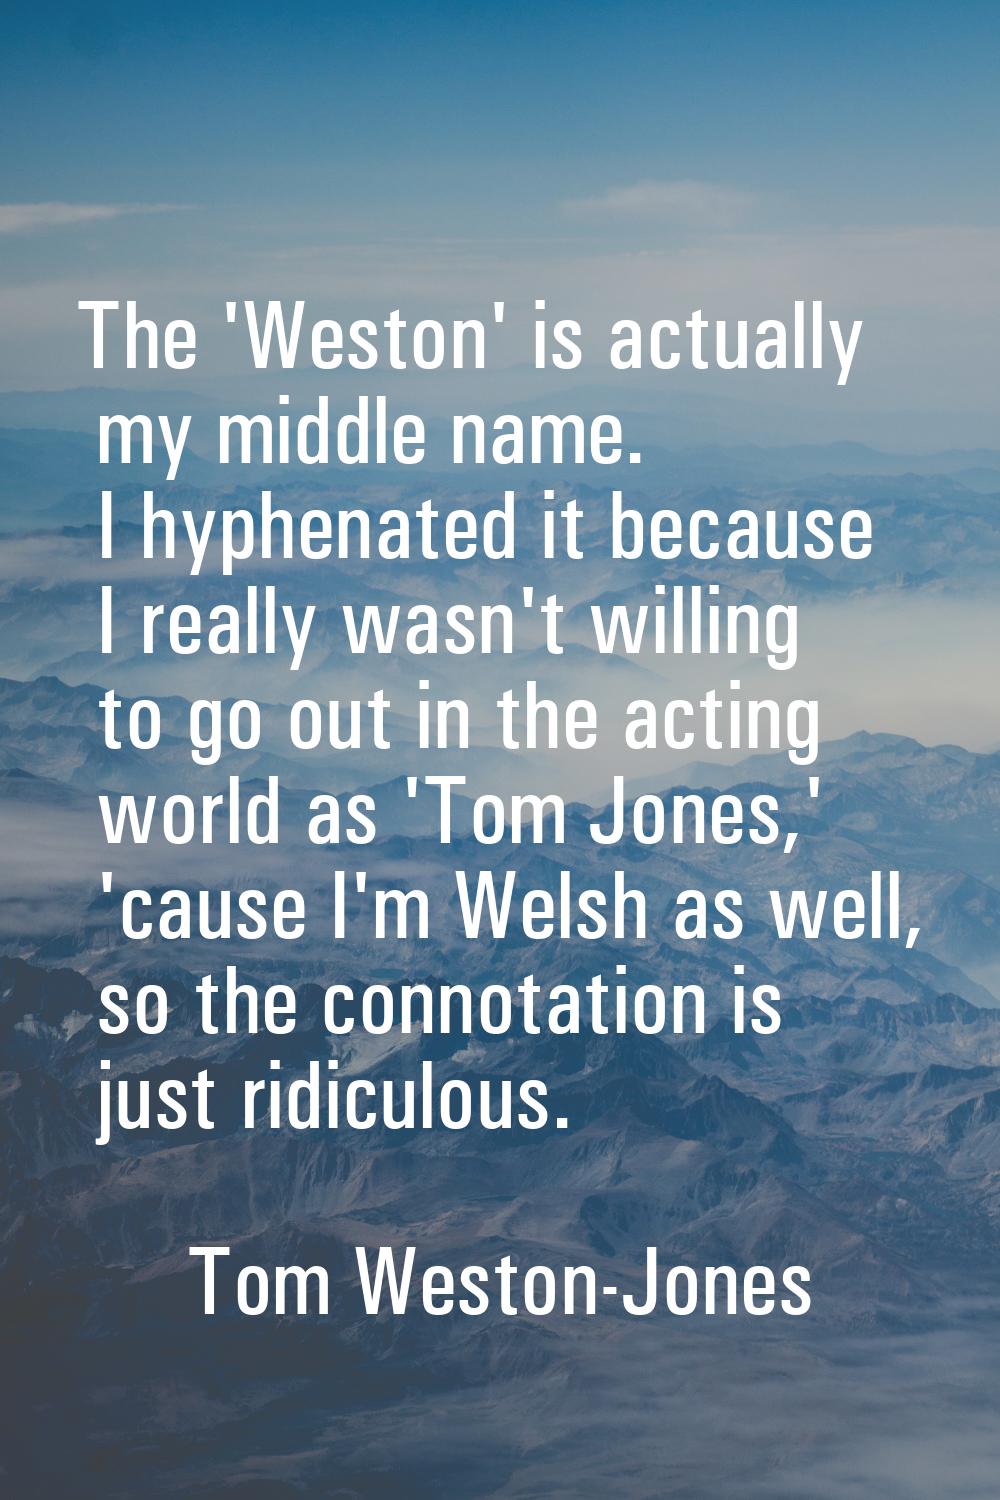 The 'Weston' is actually my middle name. I hyphenated it because I really wasn't willing to go out 